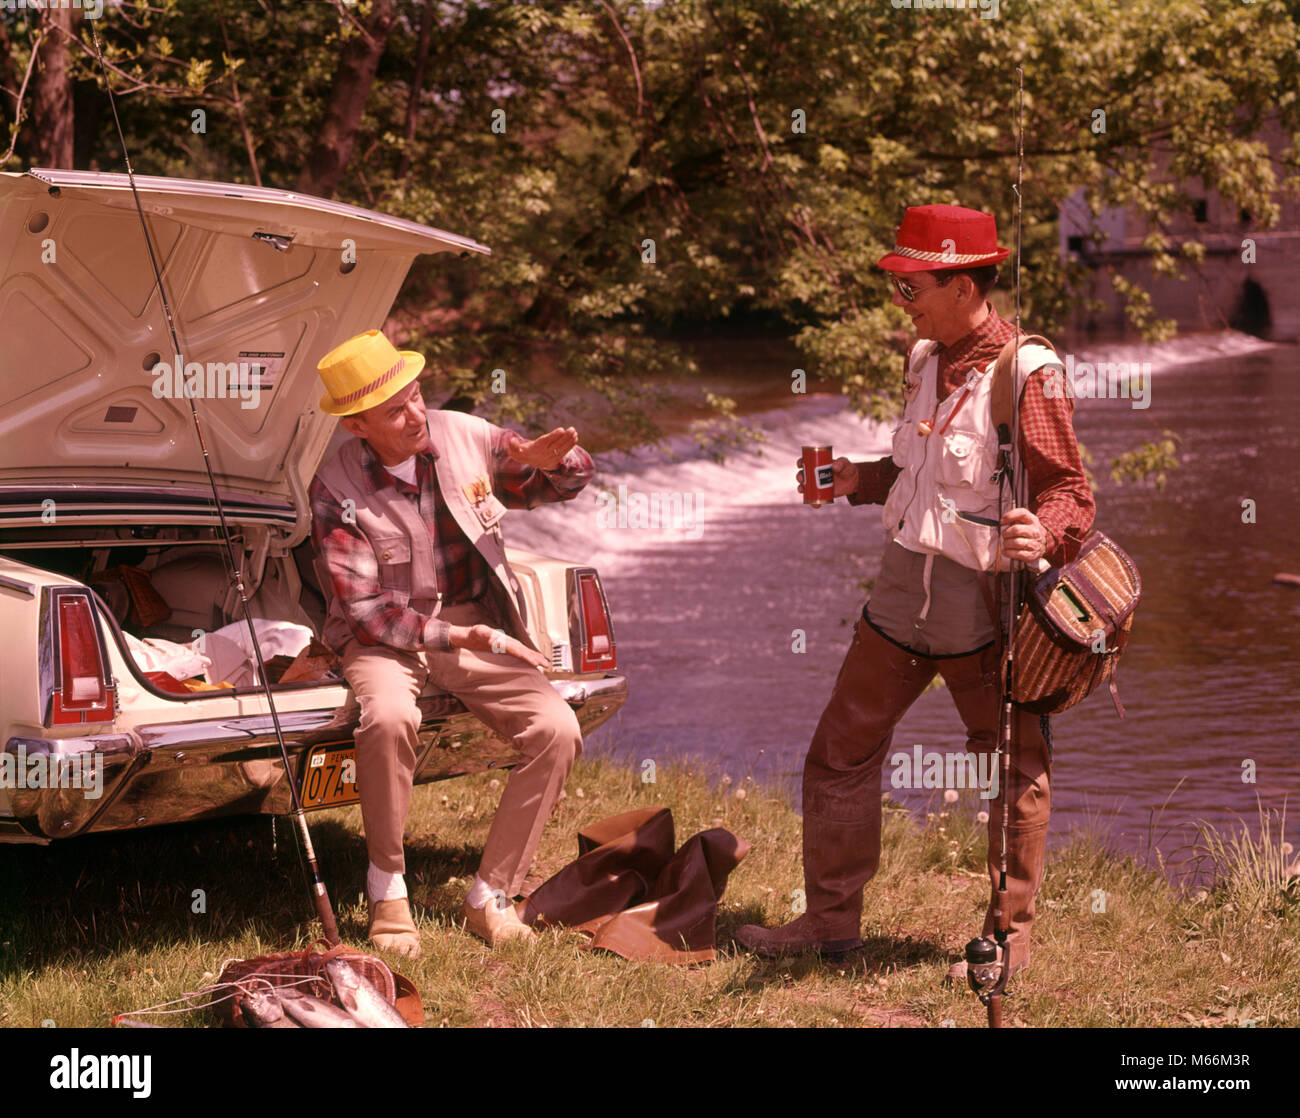 1960s TWO MEN WEARING FISHING GEAR DRINKING BEER TALKING BY OPEN CAR TRUNK ALONG STREAM - kf6293 HAR001 HARS POLE VEHICLE TWO PEOPLE CAUCASIAN ATHLETE RELAXING PLEASED JOY LIFESTYLE SATISFACTION GROWNUP COMMUNICATING TRANSPORT COPY SPACE FRIENDSHIP FULL-LENGTH GROWN-UP STREAM AUTOMOBILE SPEAK TRUNK ANIMALS ATHLETIC TACKLE TRANSPORTATION NOSTALGIA MIDDLE-AGED TOGETHERNESS MIDDLE-AGED MAN SUMMERTIME 45-50 YEARS 50-55 YEARS POLES ALCOHOLIC CHEERFUL BEVERAGE HOBBY LEISURE RELAXATION AUTOS ENJOYING RECREATION SMILES THREE ANIMALS CONNECTION JOYFUL COOPERATION AUTOMOBILES COMMUNICATE MOBILITY Stock Photo